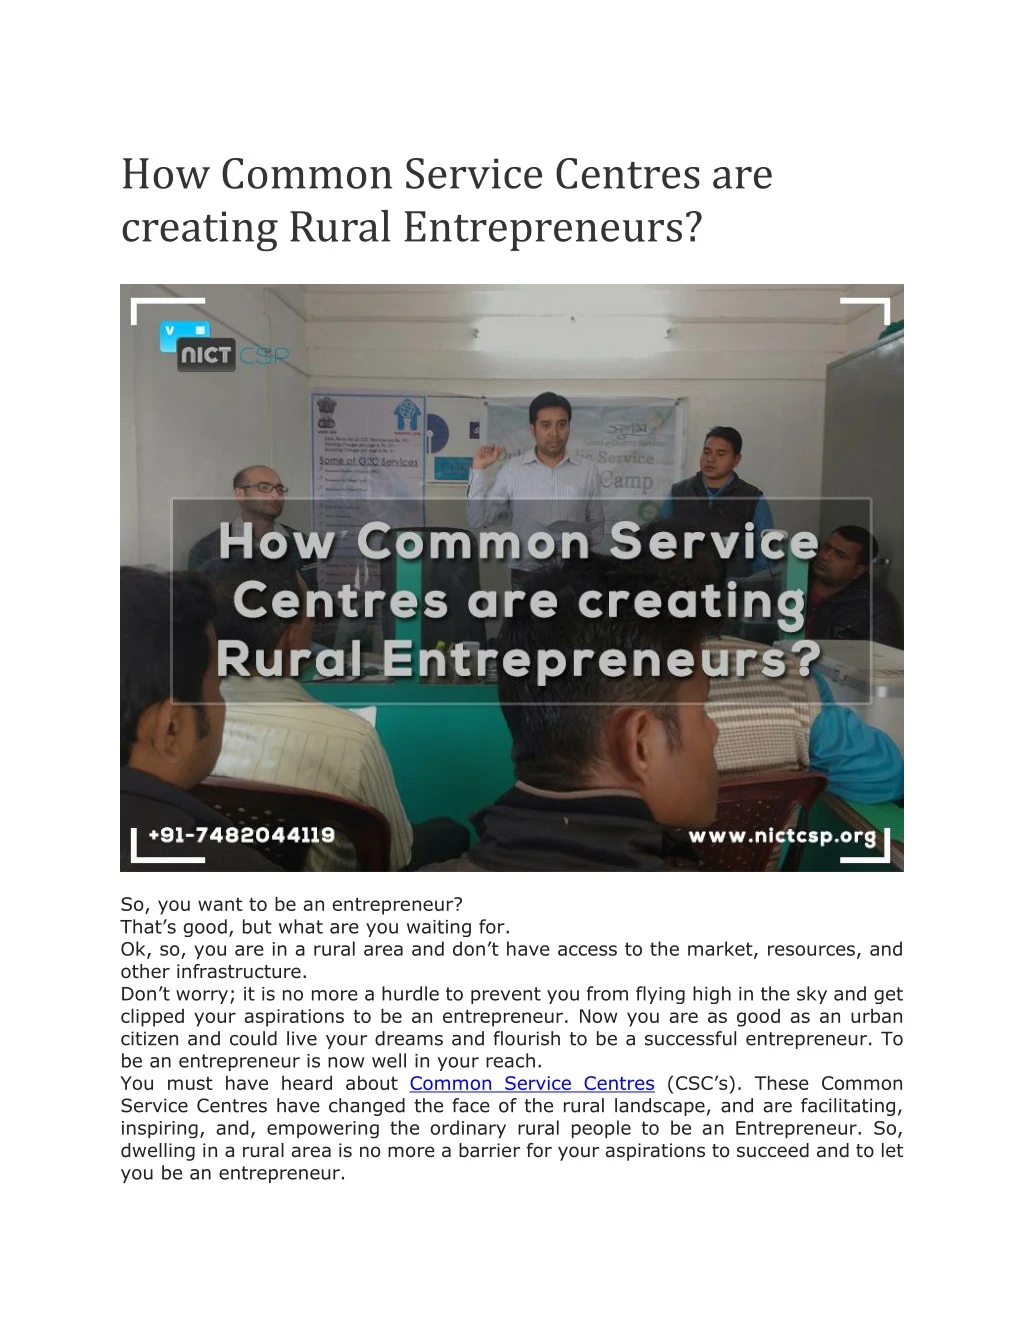 how common service centres are creating rural